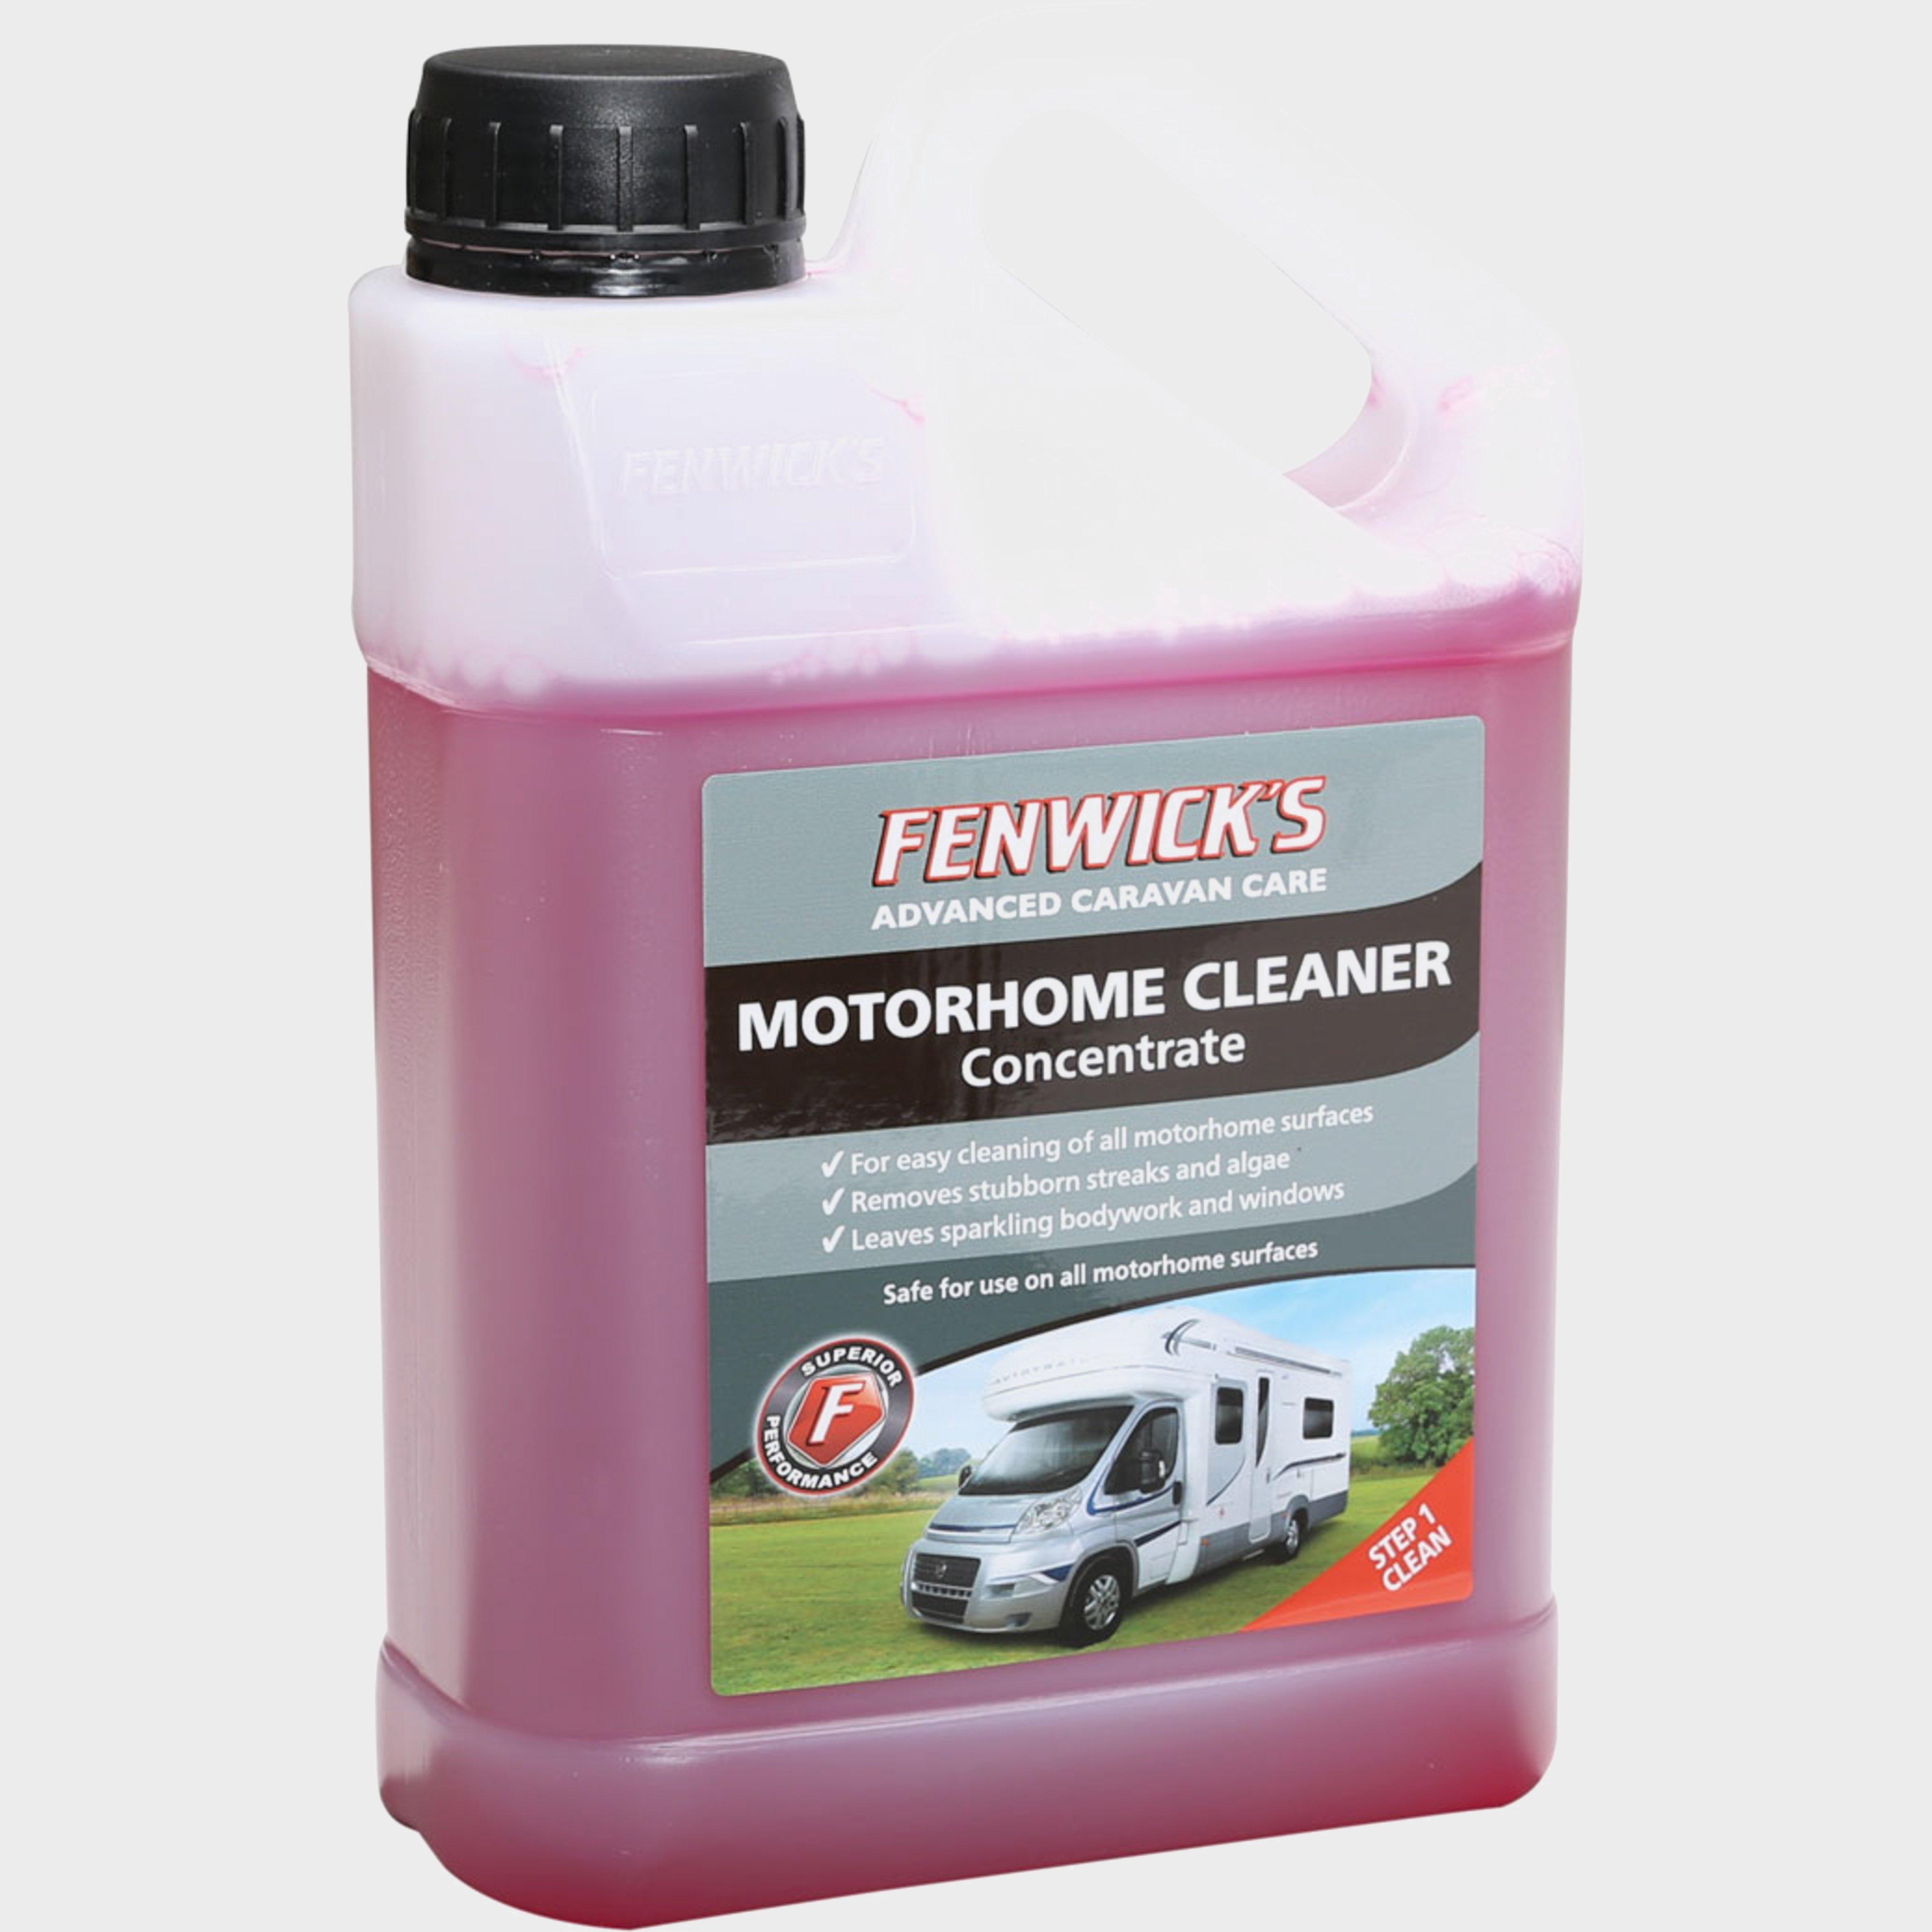 Fenwicks Motorhome Cleaner Concentrate (1 Litre) - Red/cleane  Red/cleane